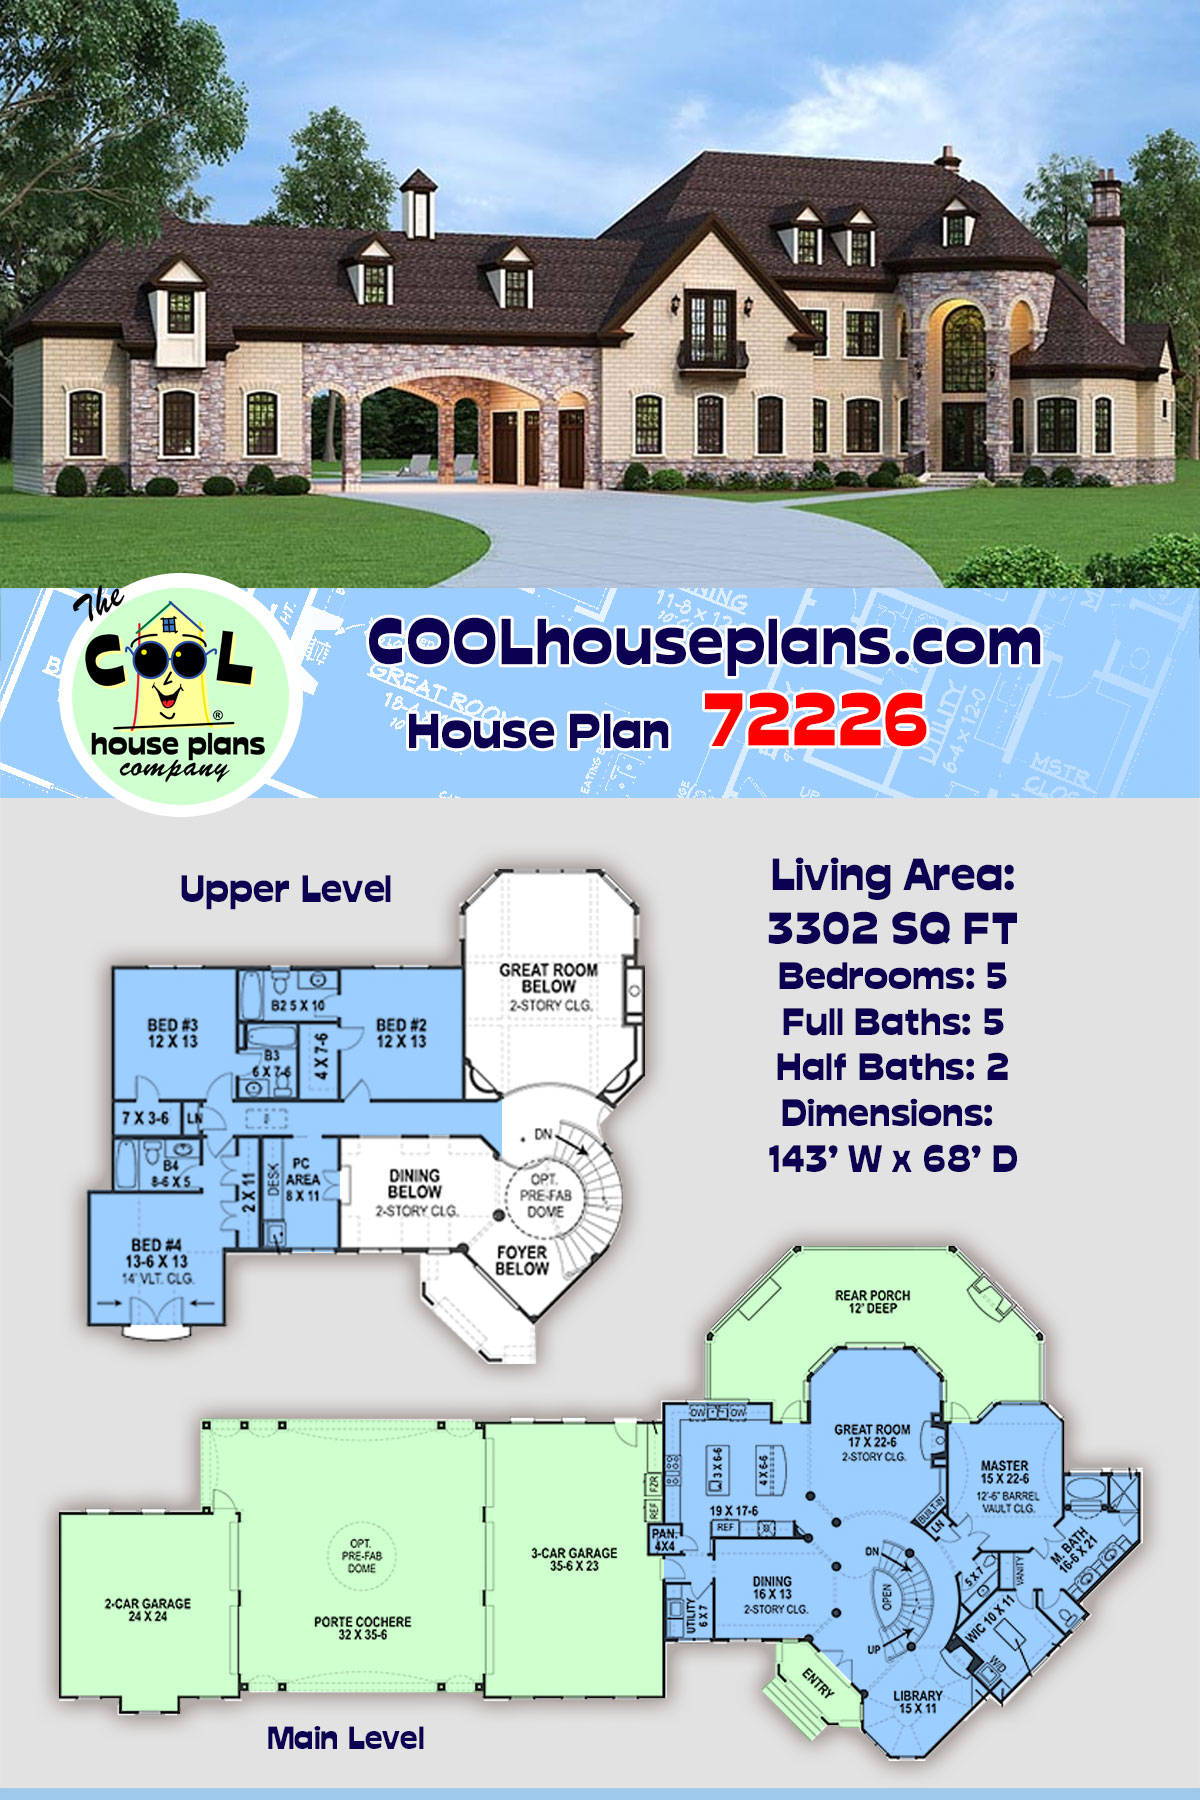 European, French Country House Plan 72226 with 5 Beds, 5 Baths, 5 Car Garage